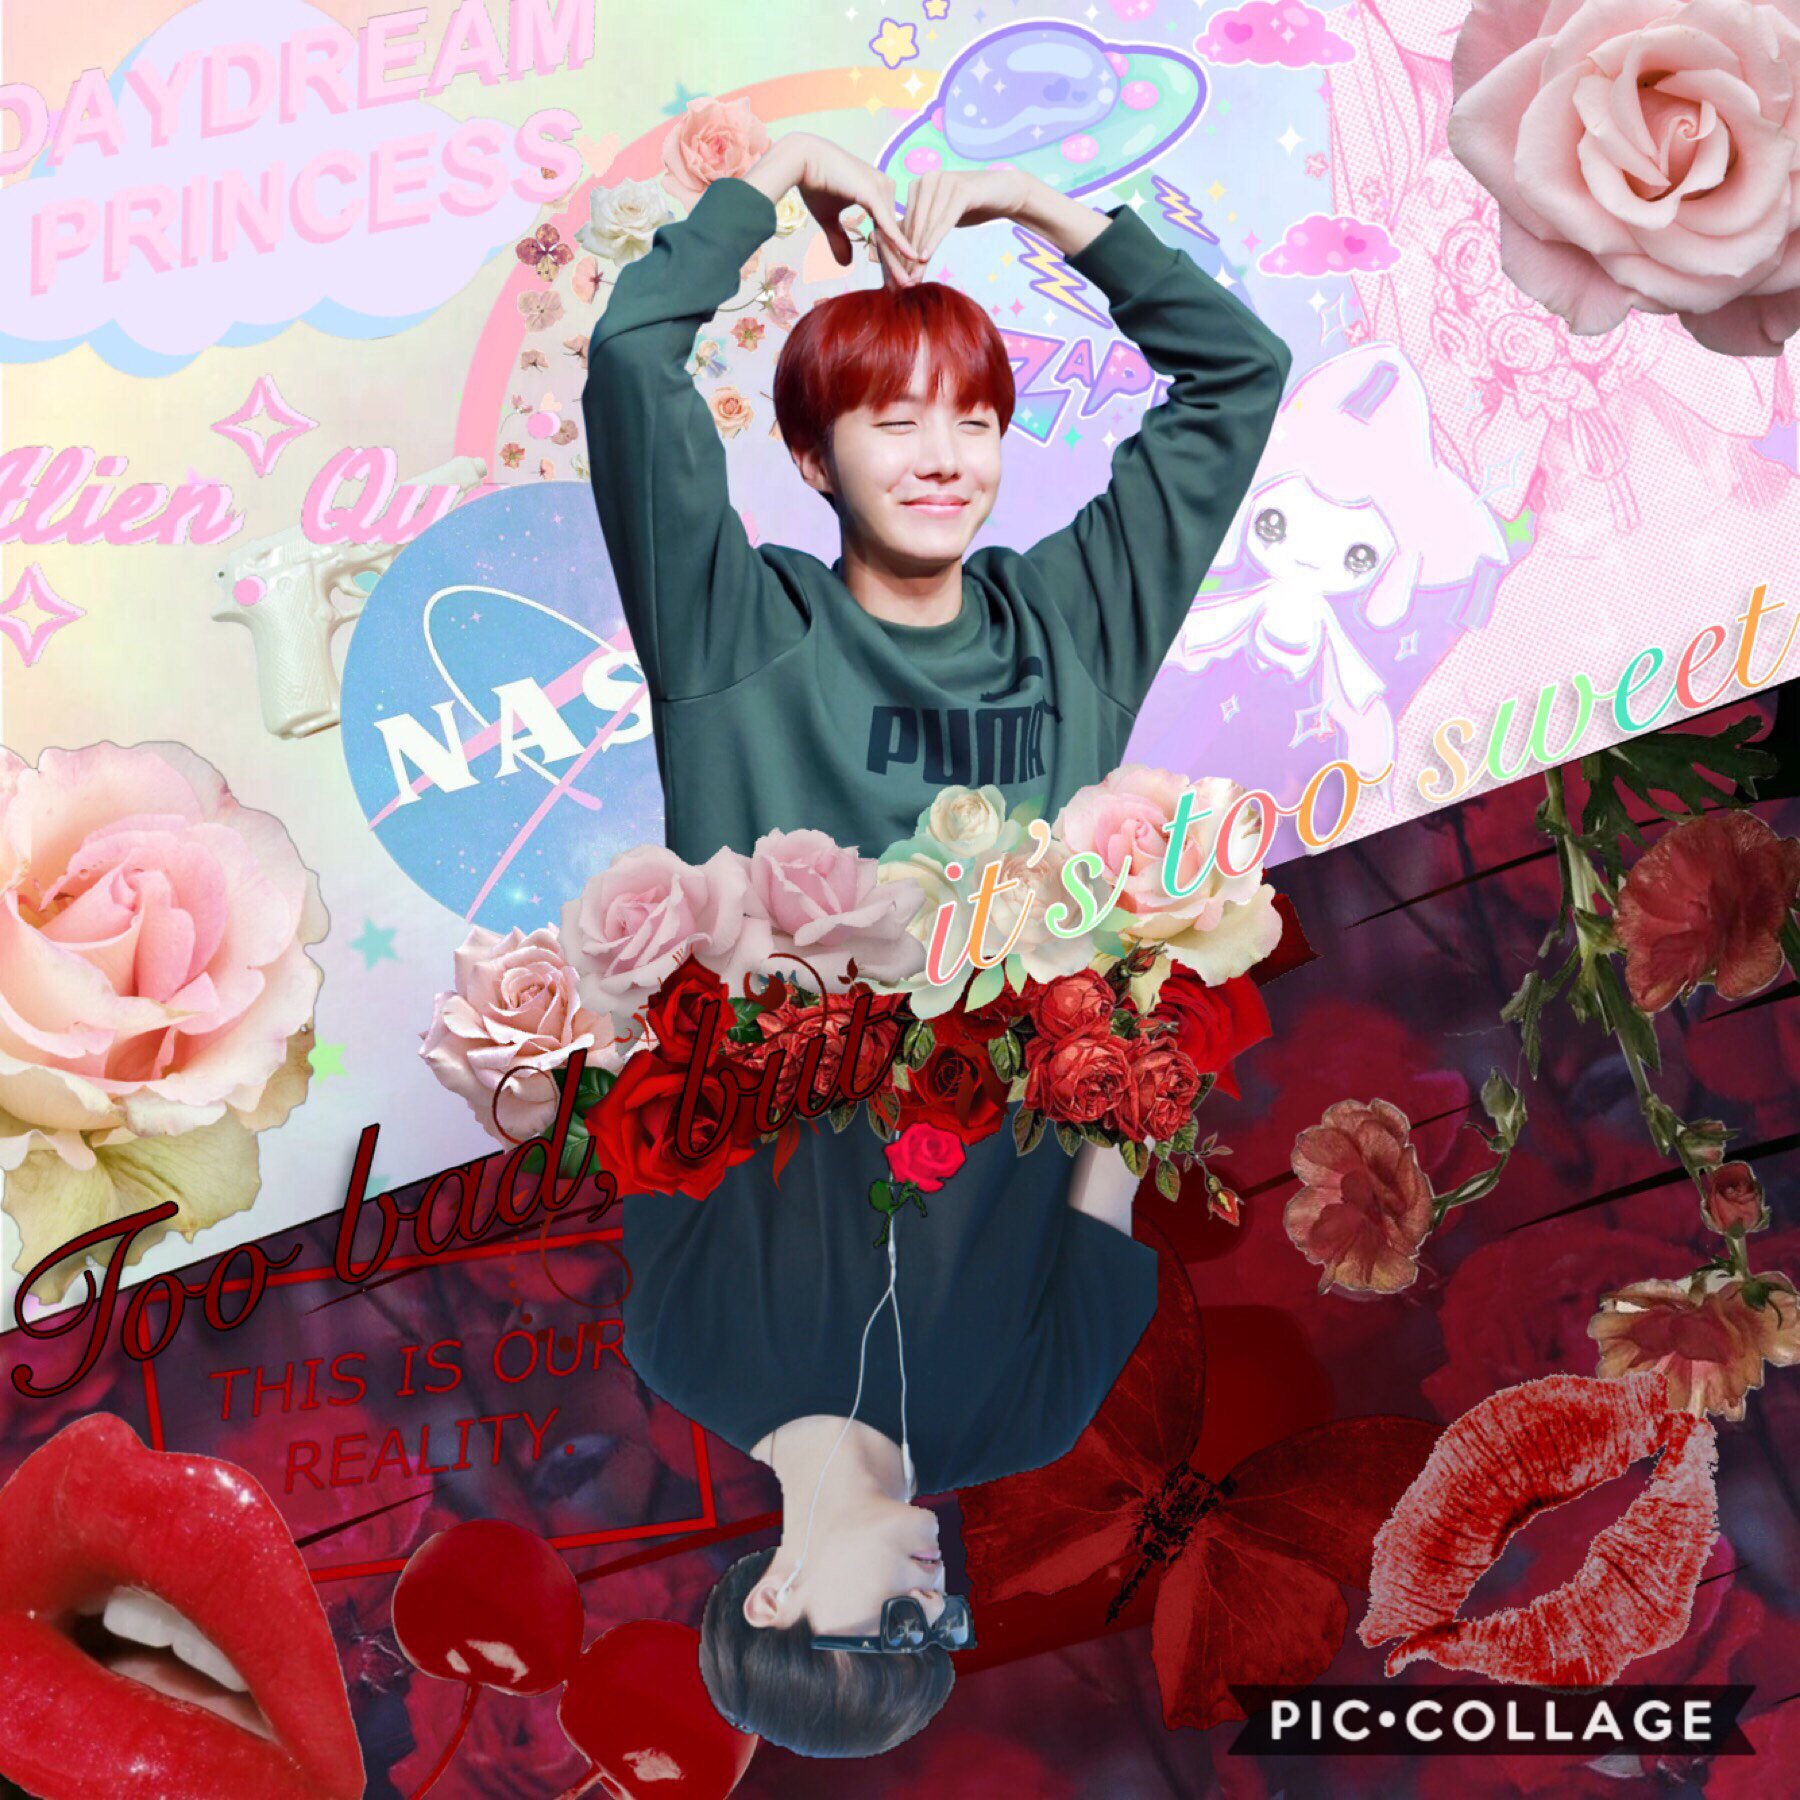 ❤️Tap💔
-
I realised I haven’t posted any j-hope edits here so I had to fix that 
-
Can I just say Boy Meets Evil is WAY UNDERRATED 😱
-
qotd: sweet or savoury?
aotd: sweet 😋🧁